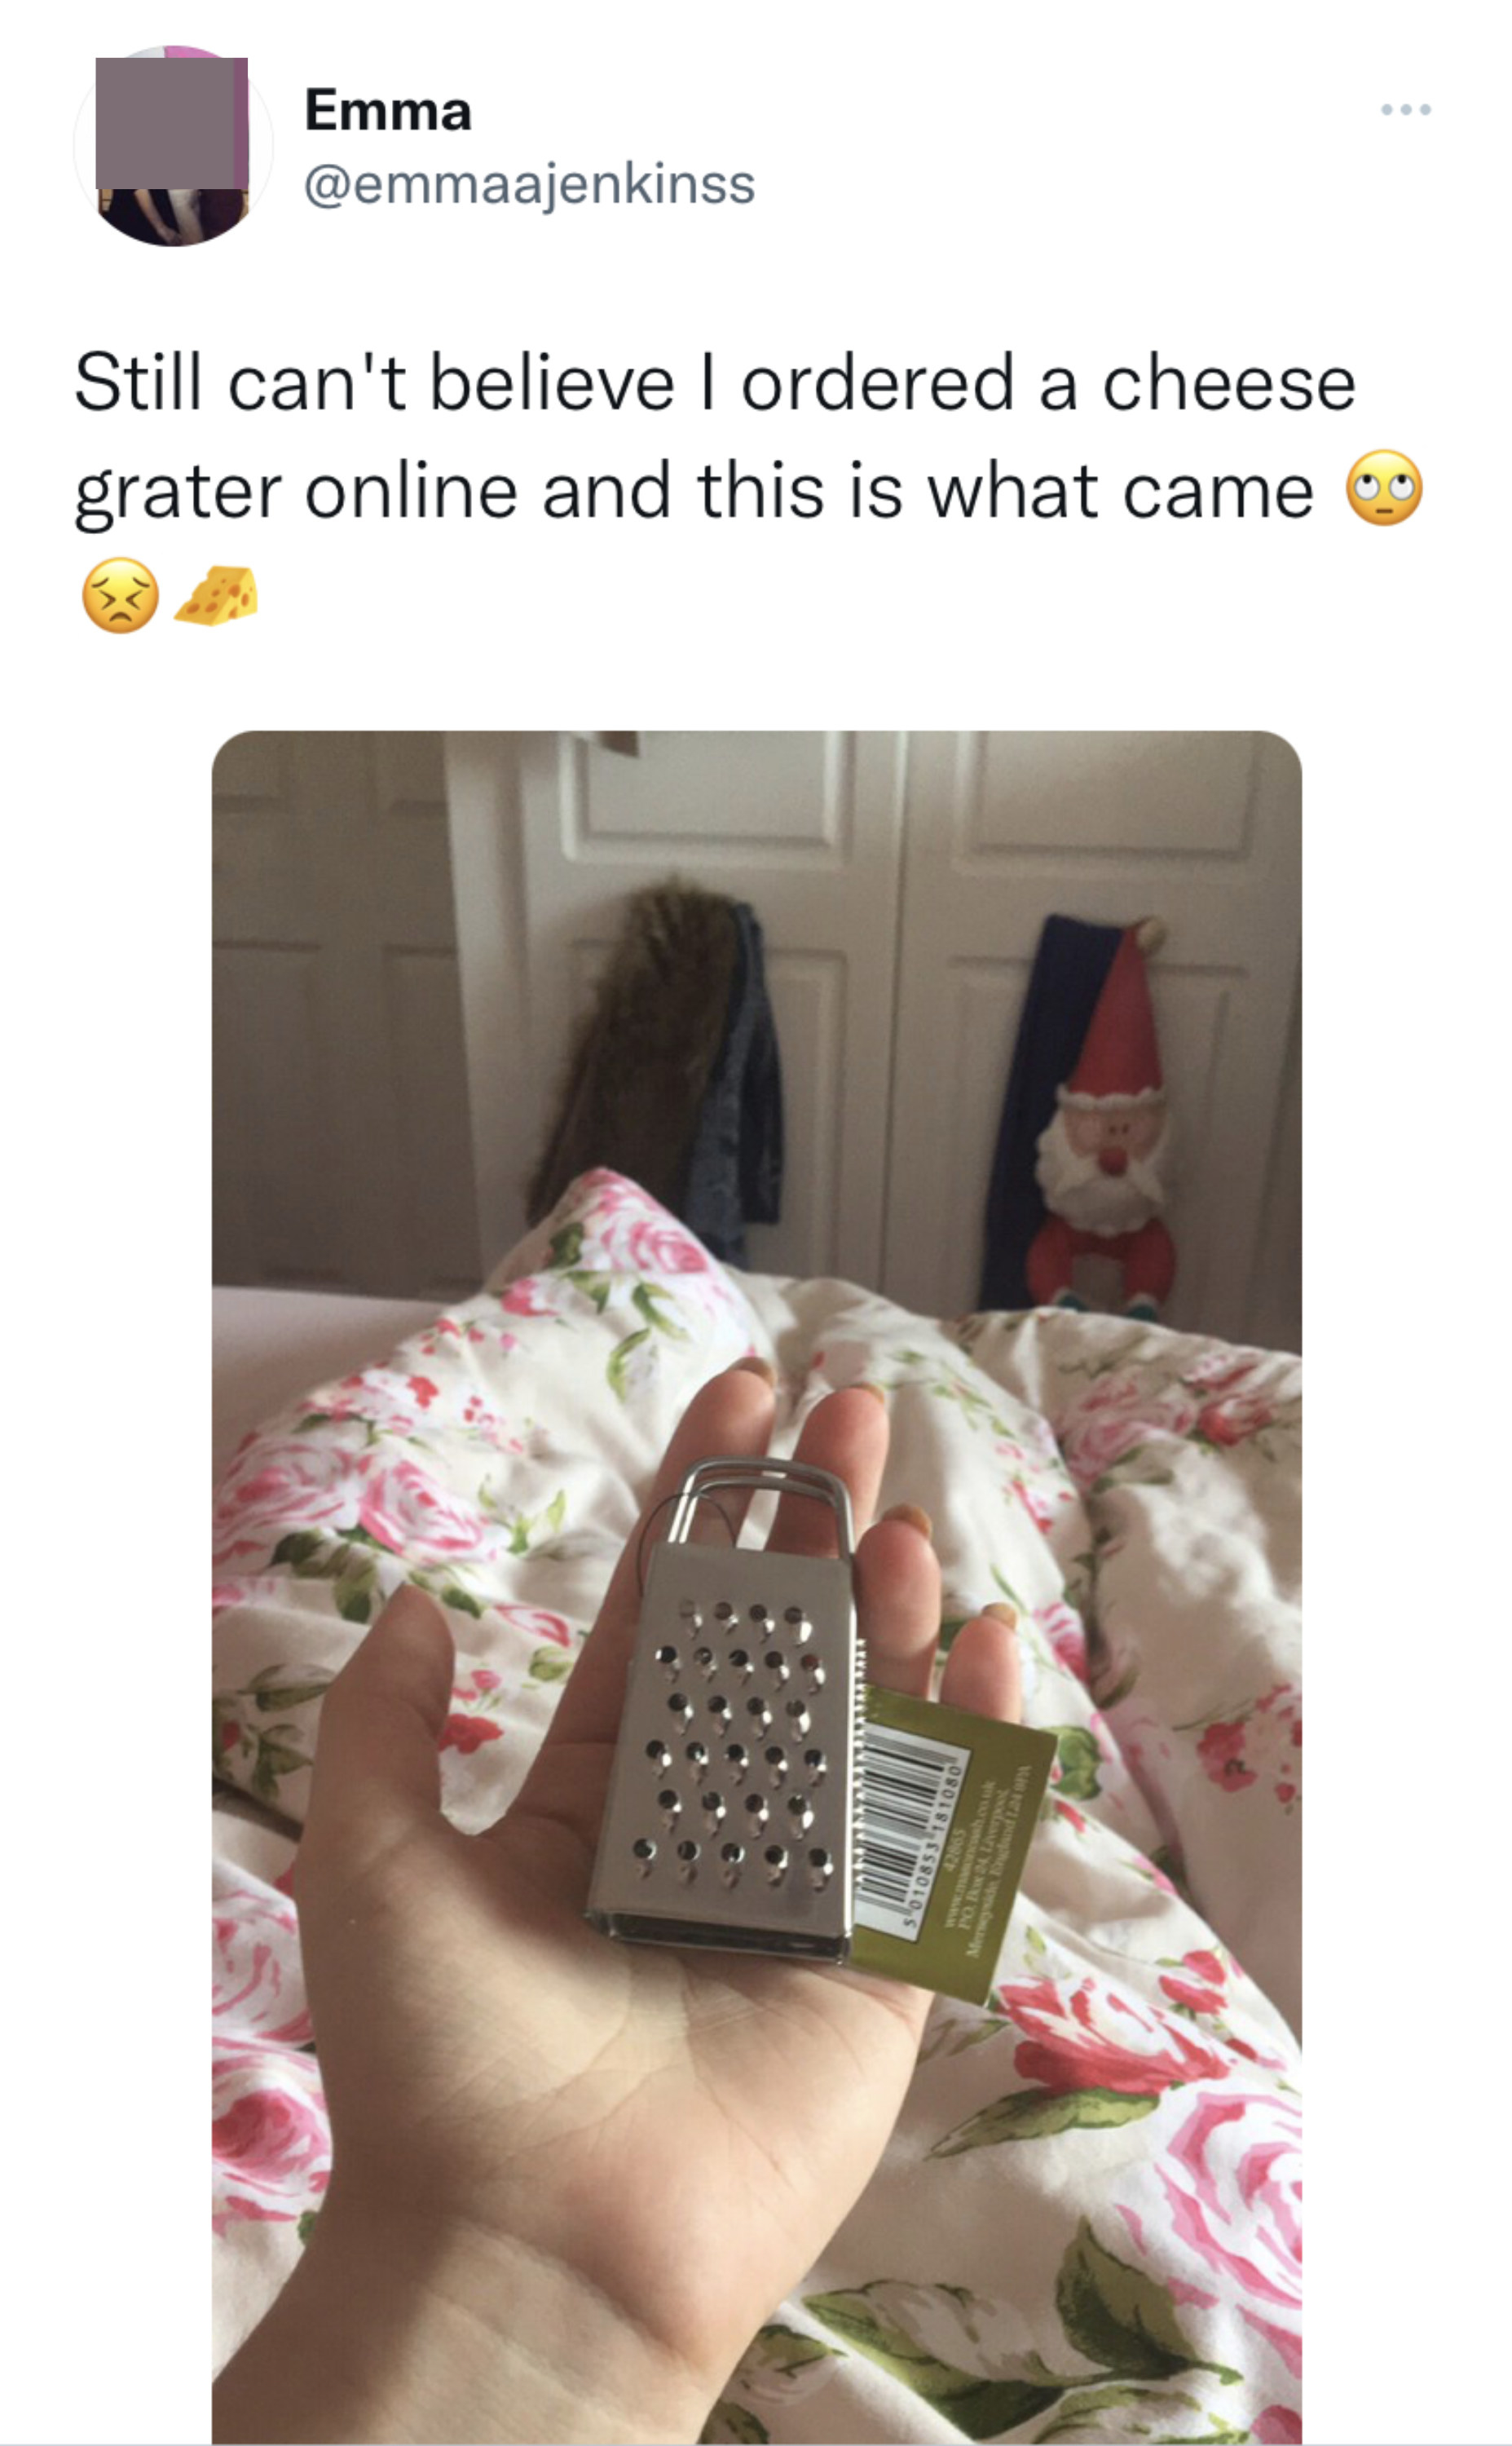 A tiny cheese grater